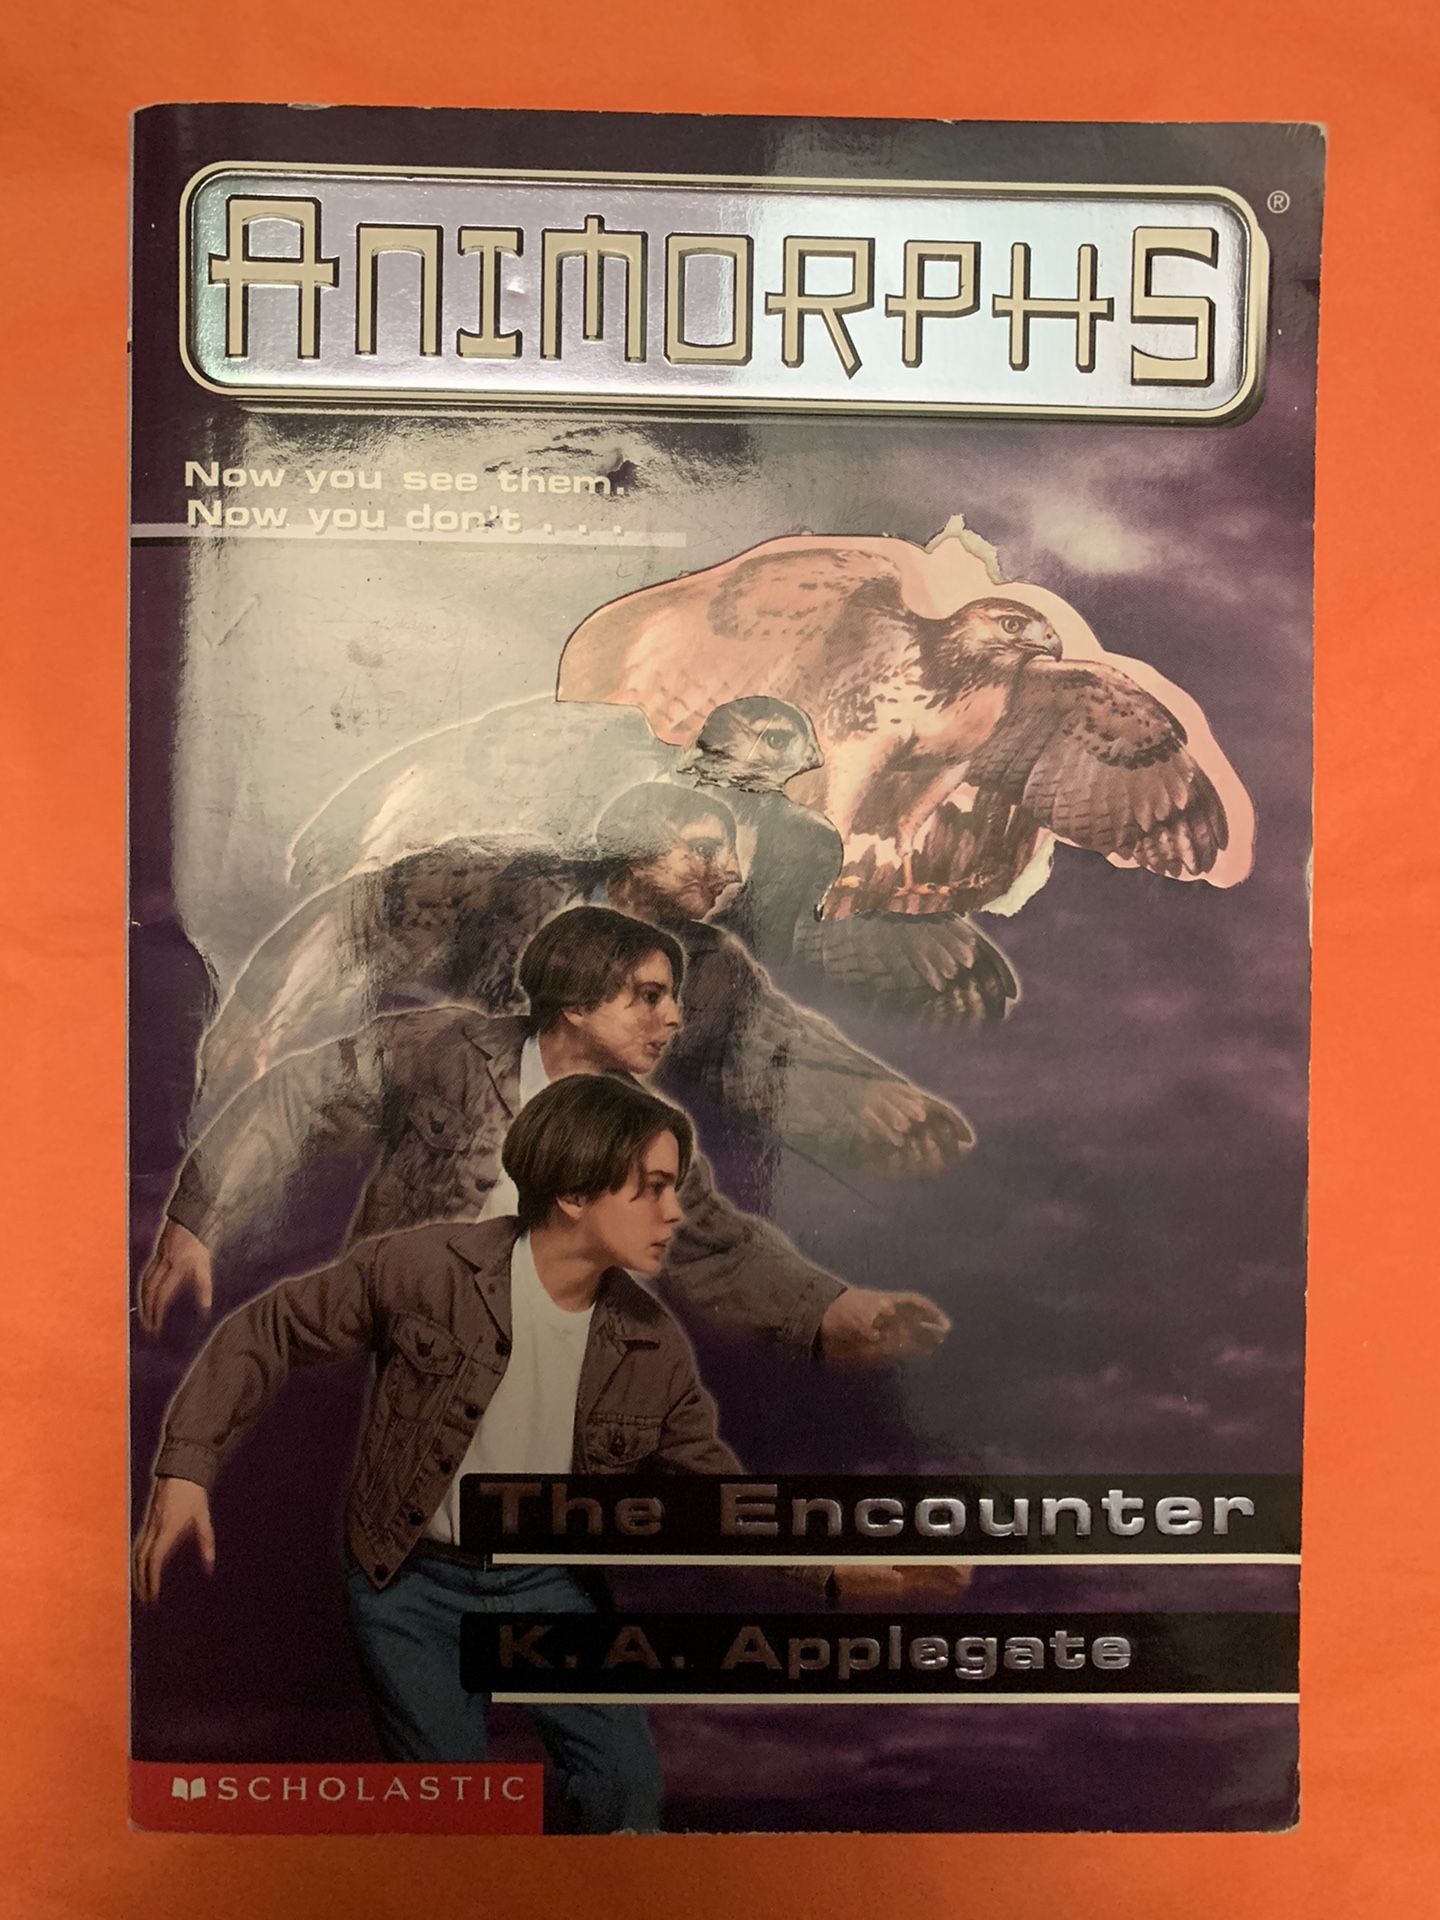 Animorphs #3 The Encounter by K.A. Applegate Book